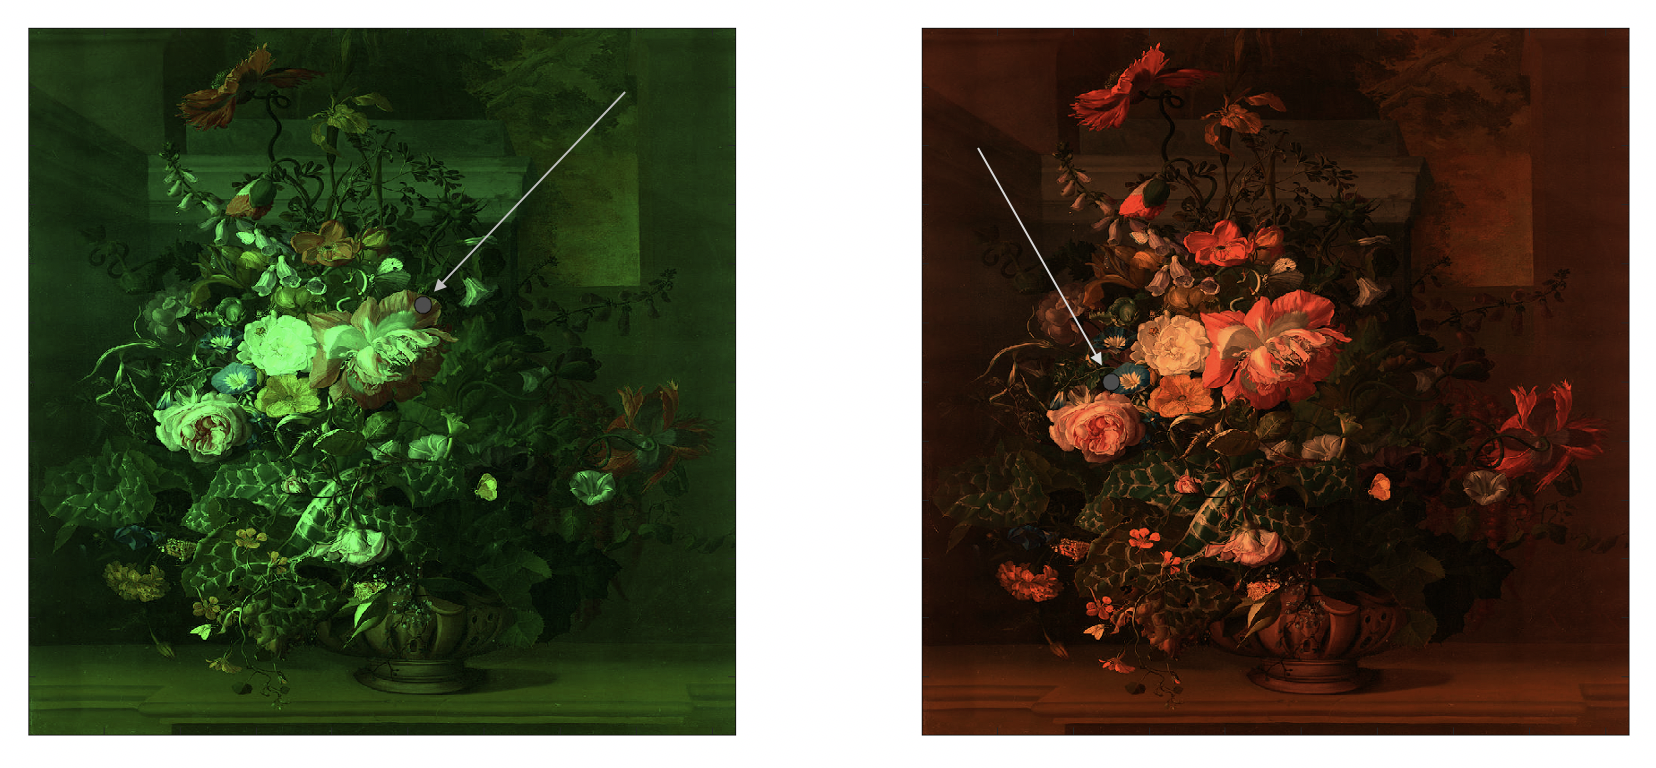 Color constancy. On the painting on the left, the circled region on the demarcated flower petal appears red, but is actually gray. On the painting on the right, the circled region on the demarcated flower petal appears blue, but is also gray. Painting by Rachel Ruysch, ca. 1680.